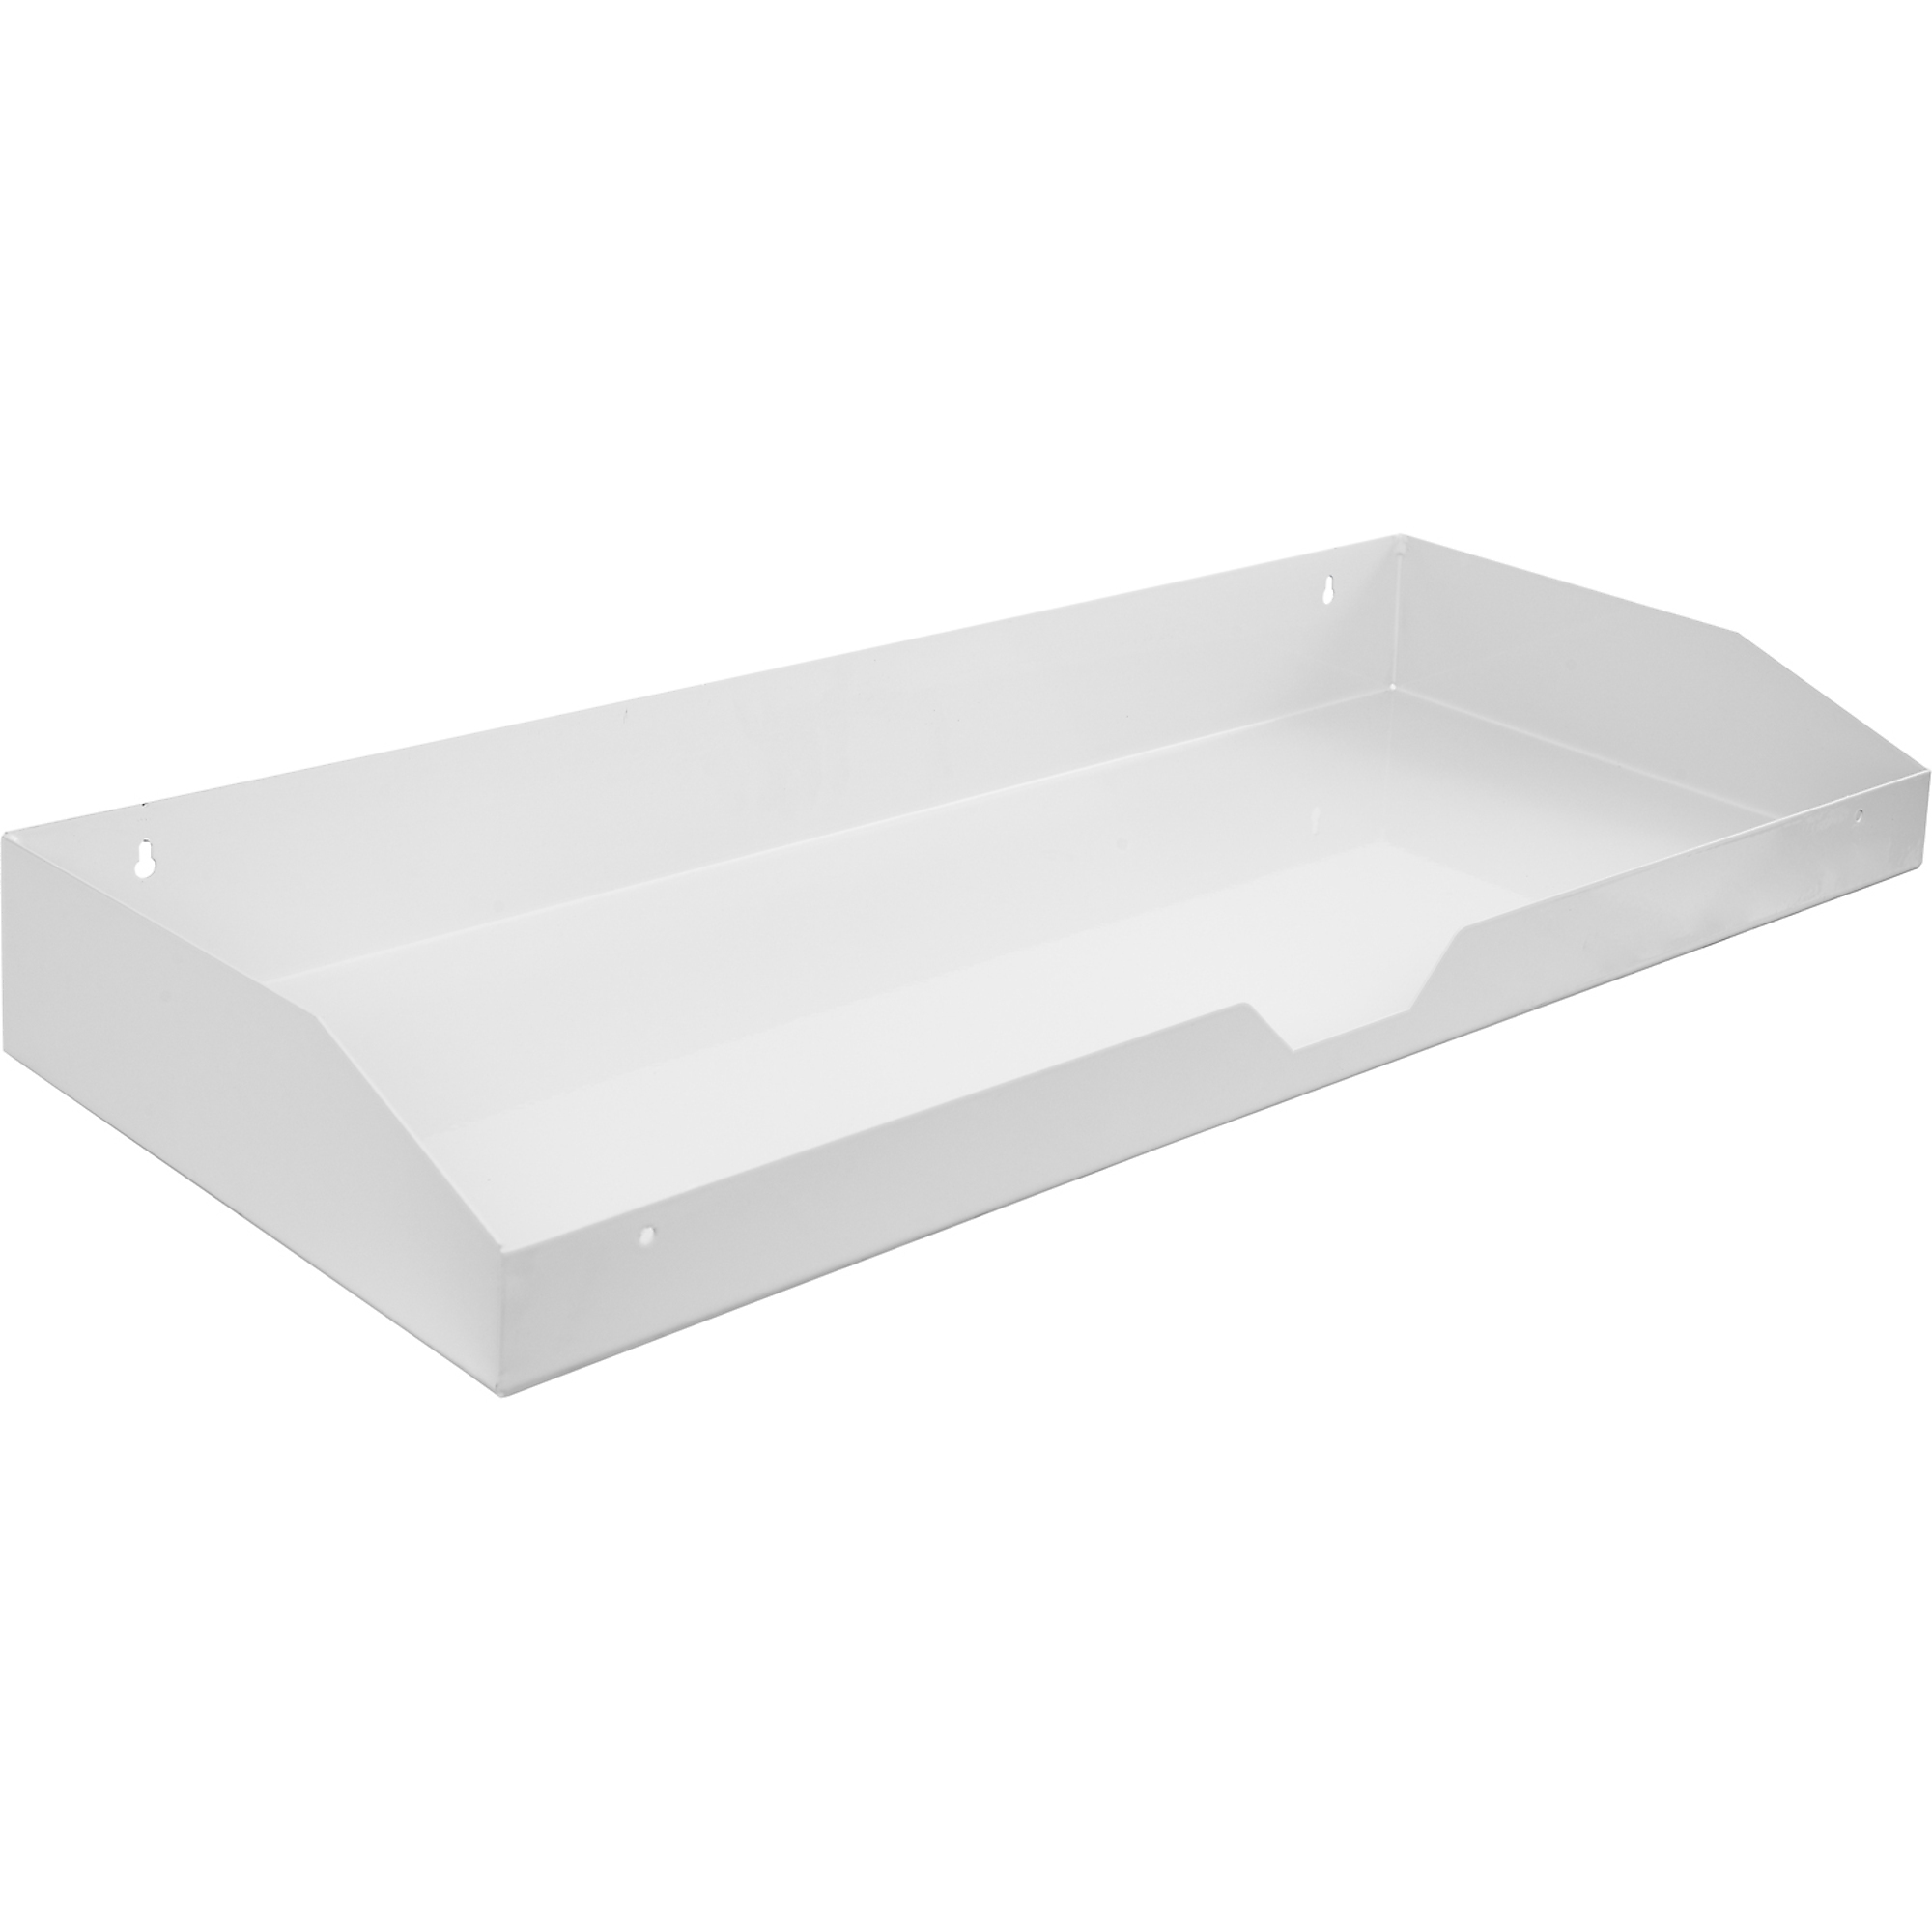 Buyers Products, Storage Tray For 18X16X72 Topsider Truck Box, Model 1702880TRAY